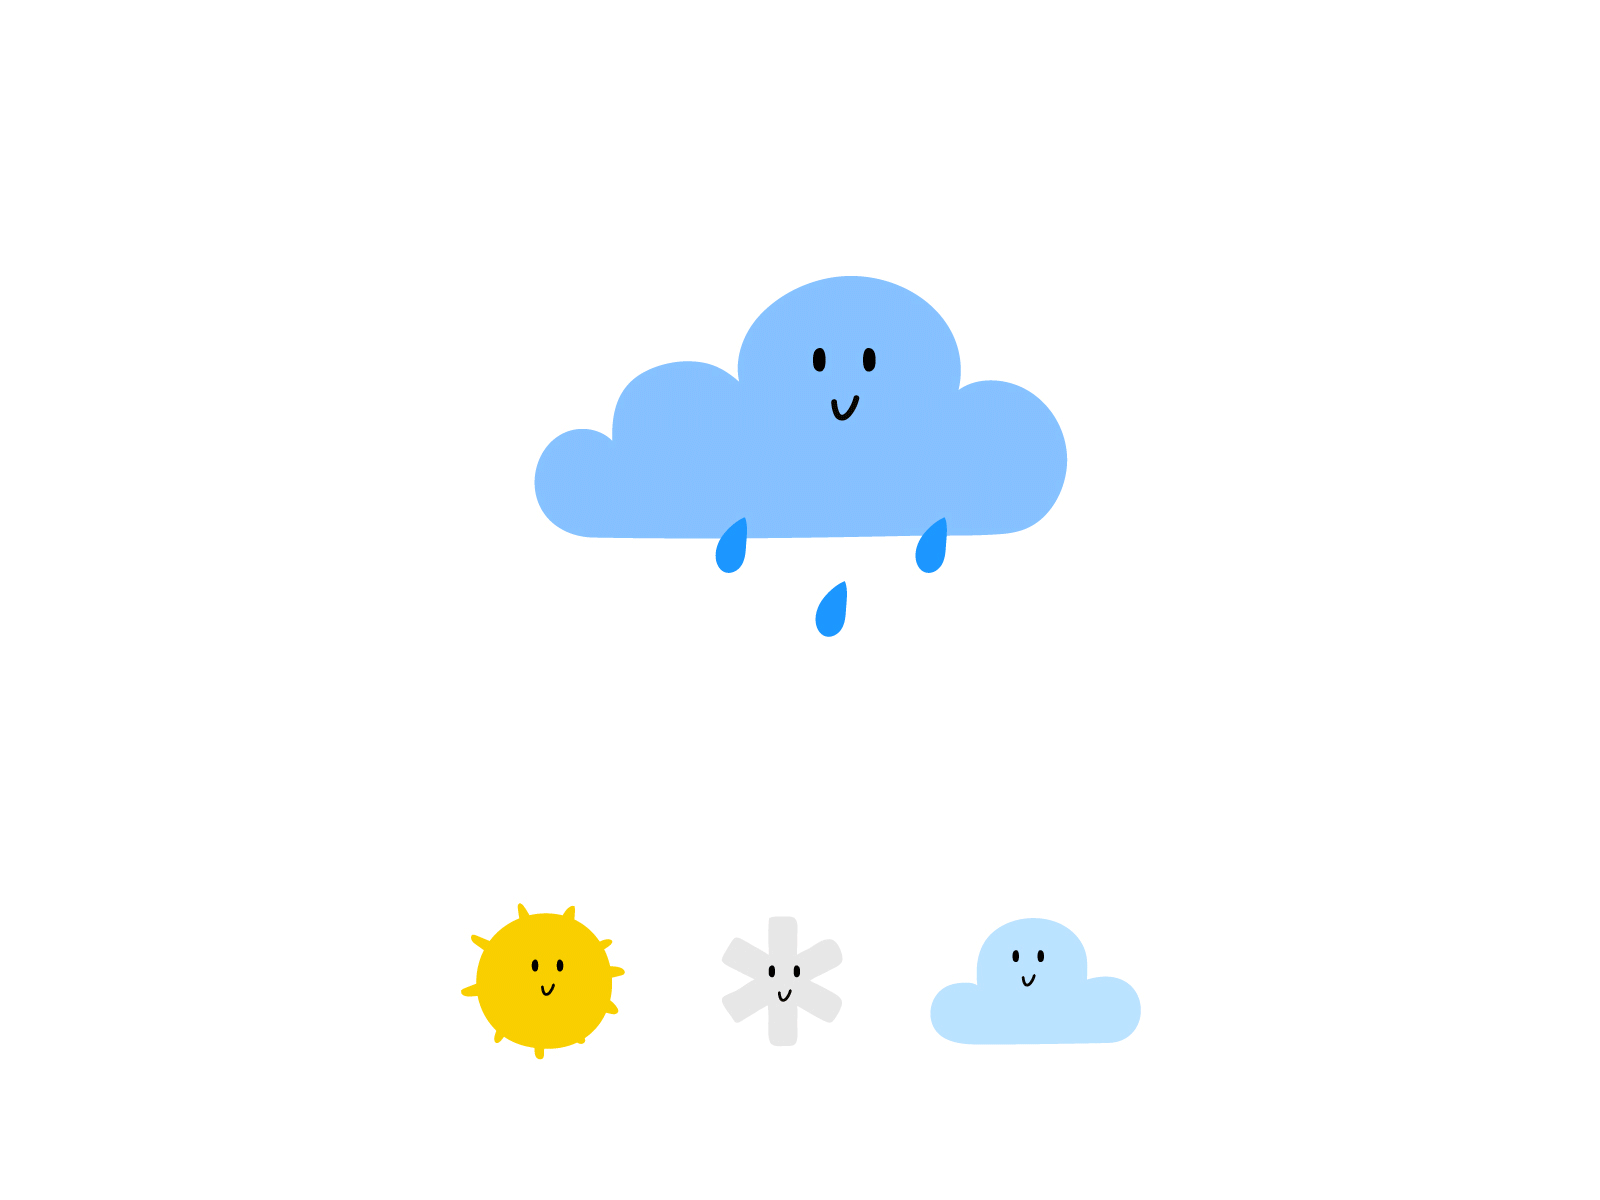 Climate Change - Weather Icons by Pooja Jadav on Dribbble